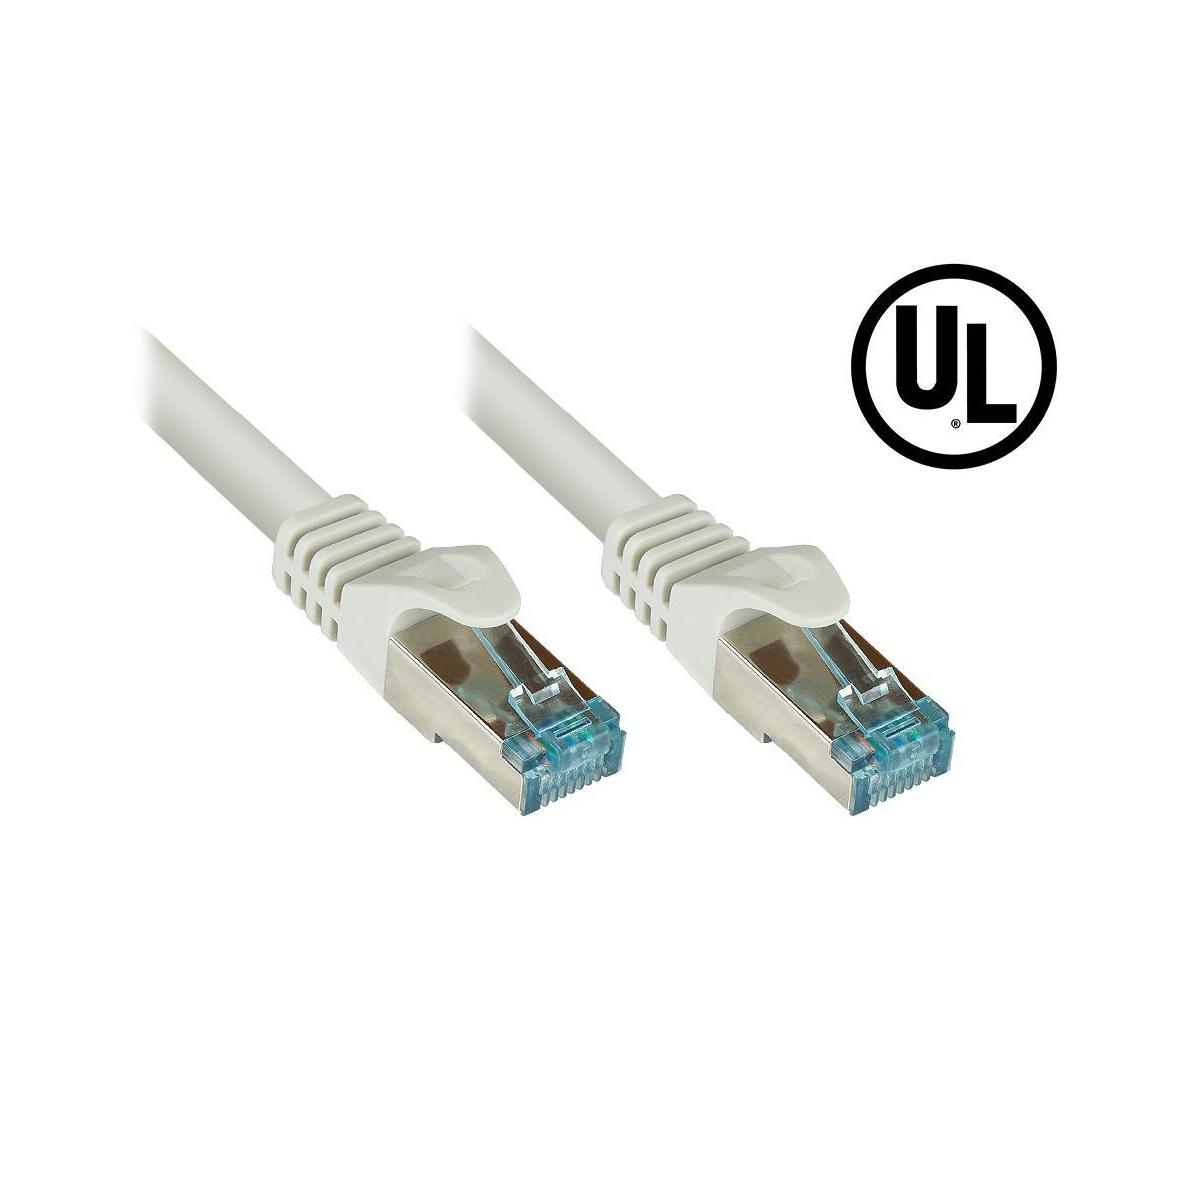 VARIA GROUP 8064-H400 Patchcable Cat.6a, Grau